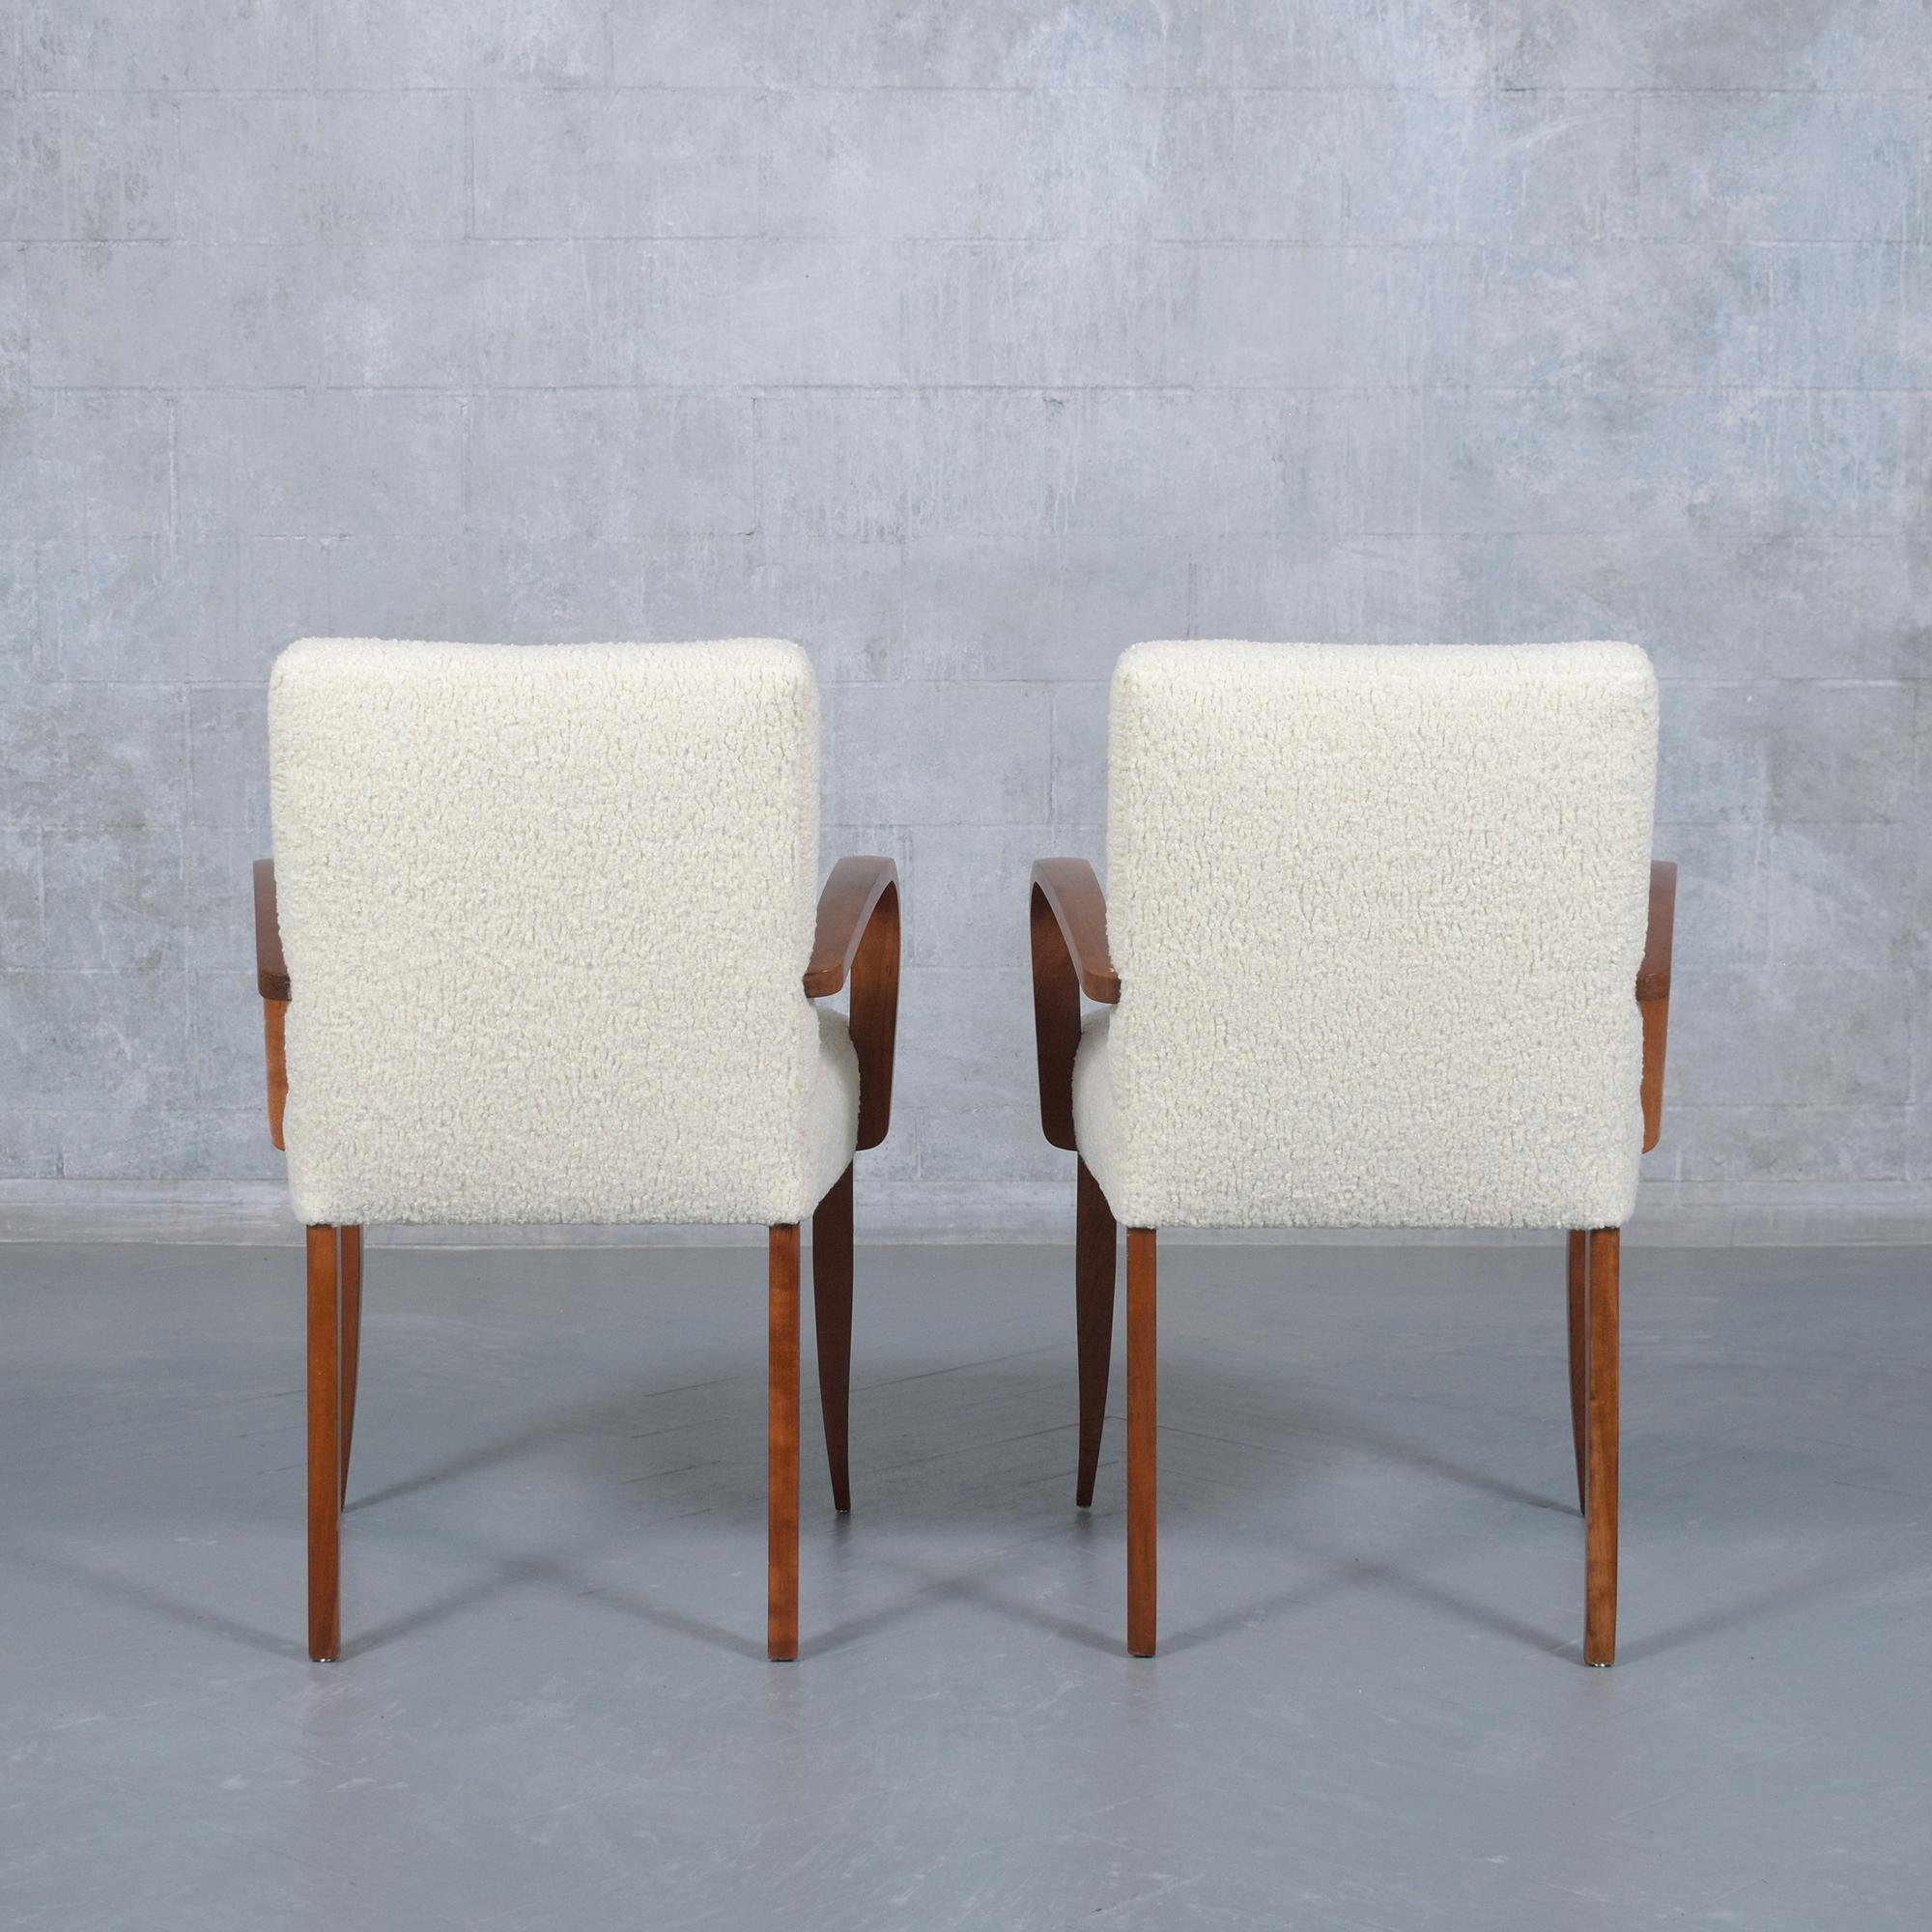 Pair of Mid-Century Modern Walnut Armchairs: Refined Elegance & Comfort For Sale 2